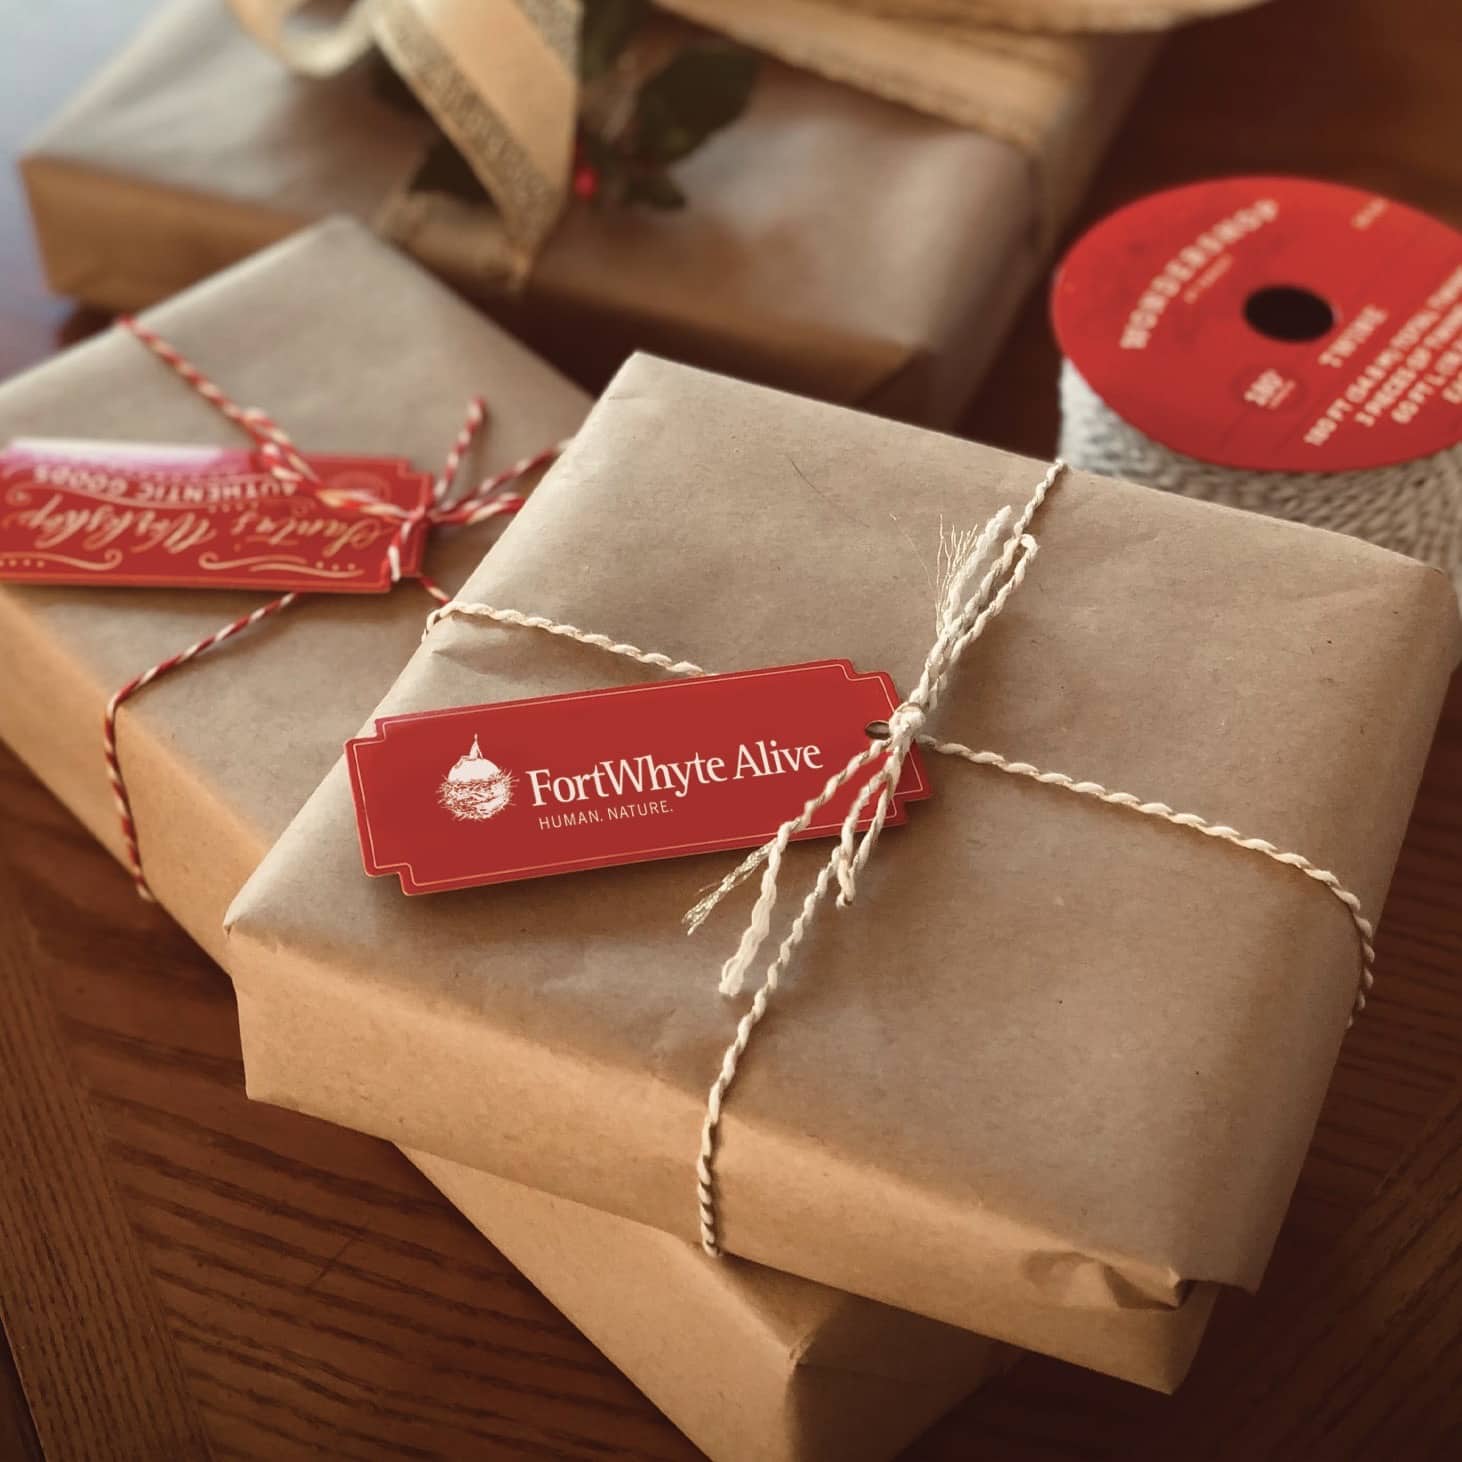 gifts wrapped in brown paper with tag reading "FortWhyte Alive"